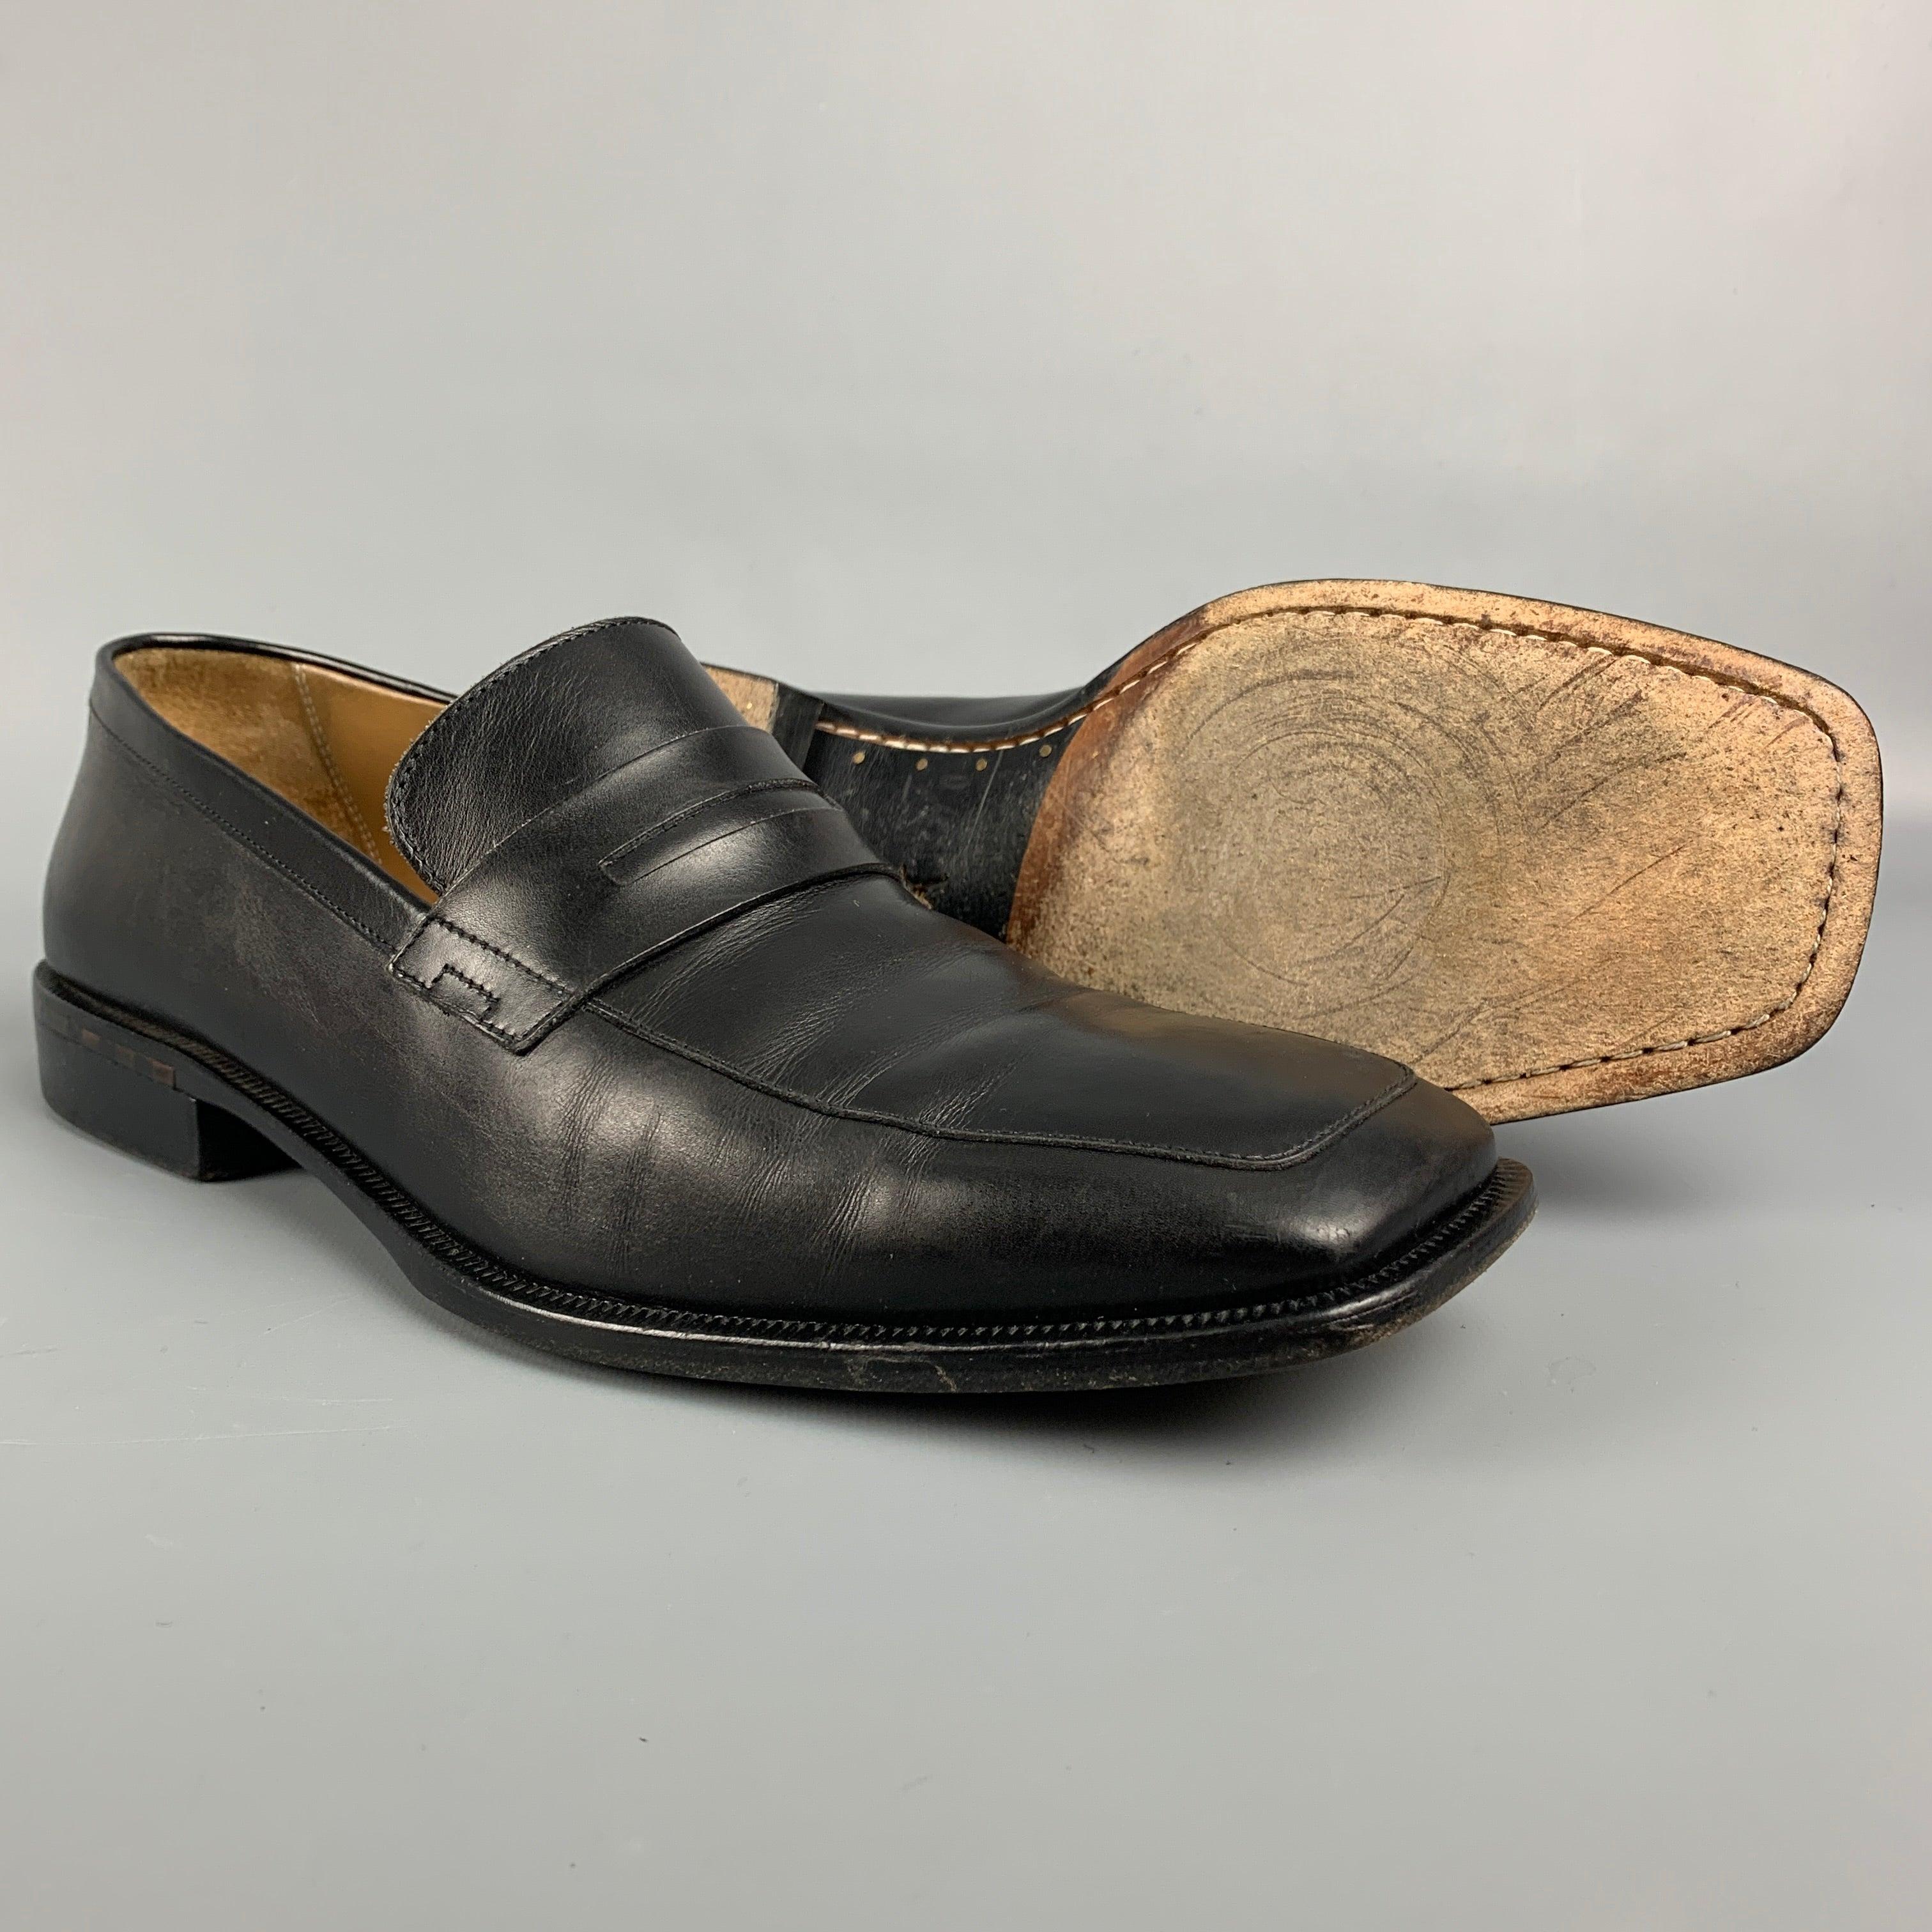 LOUIS VUITTON Size 10 Black Leather Square Toe Loafers In Good Condition For Sale In San Francisco, CA